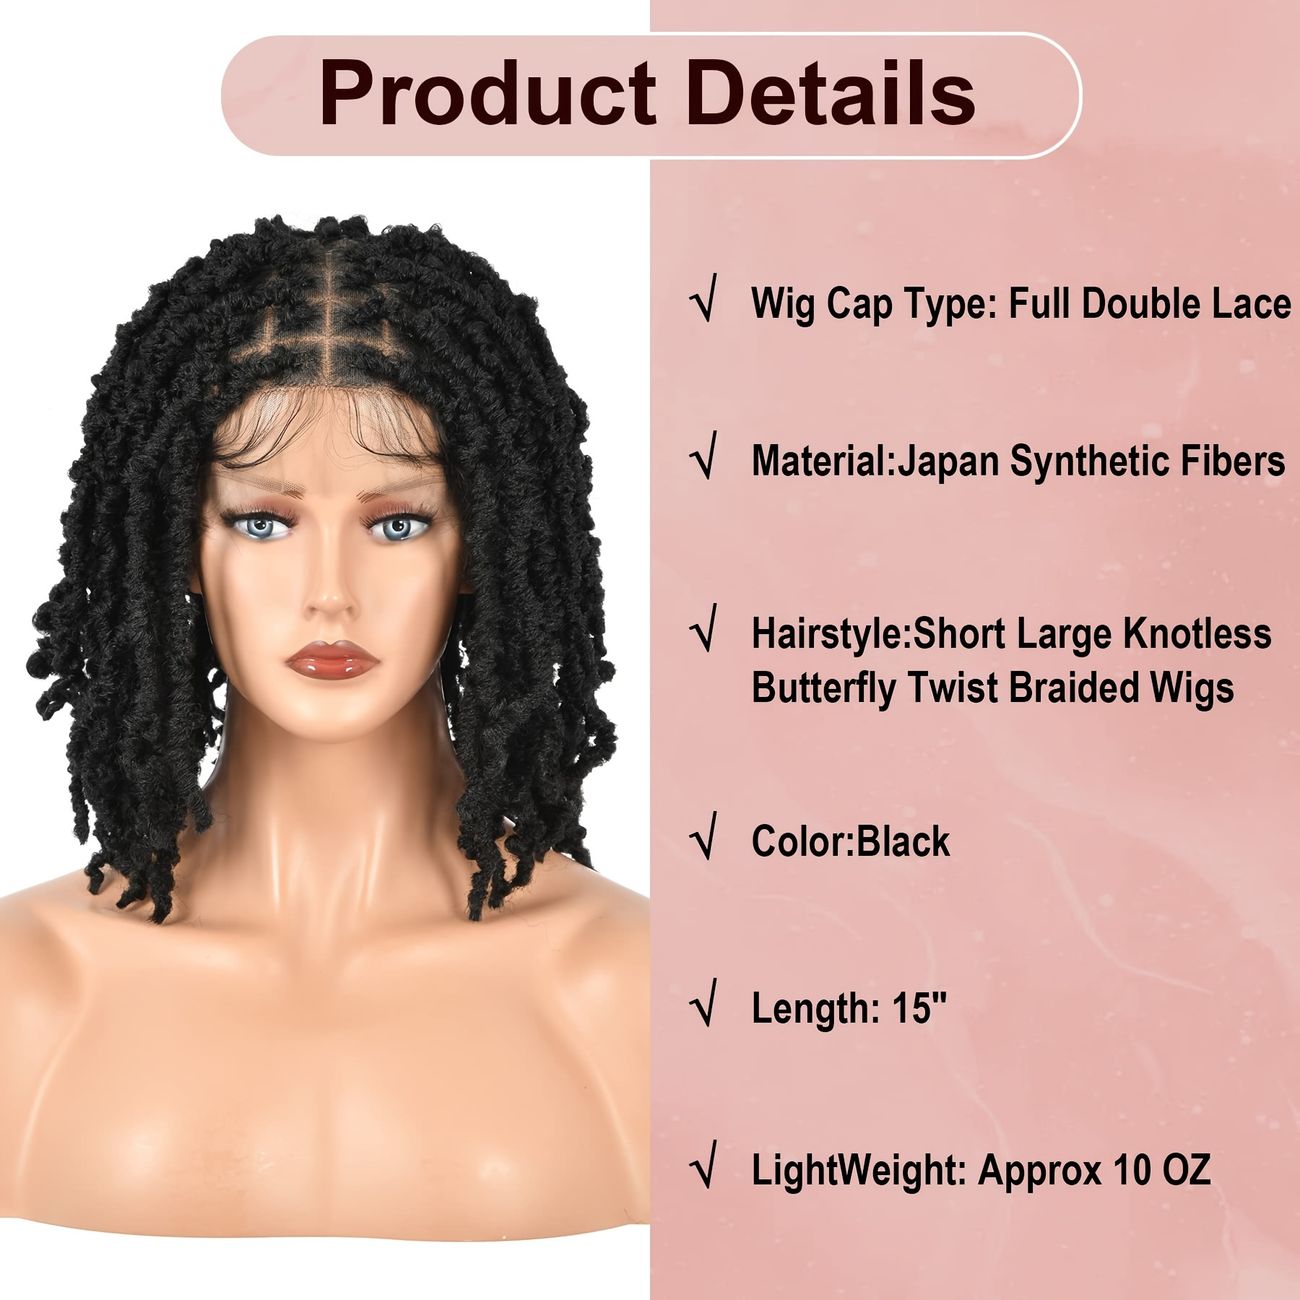 Short Large Knotless Butterfly Twist Braided Wigs Full Double Lace Front  Knotless Locs Braided Wigs Synthetic Lace Frontal Black Short Bob Twist  Braided Wig With Baby Hair - Beauty & Personal Care -